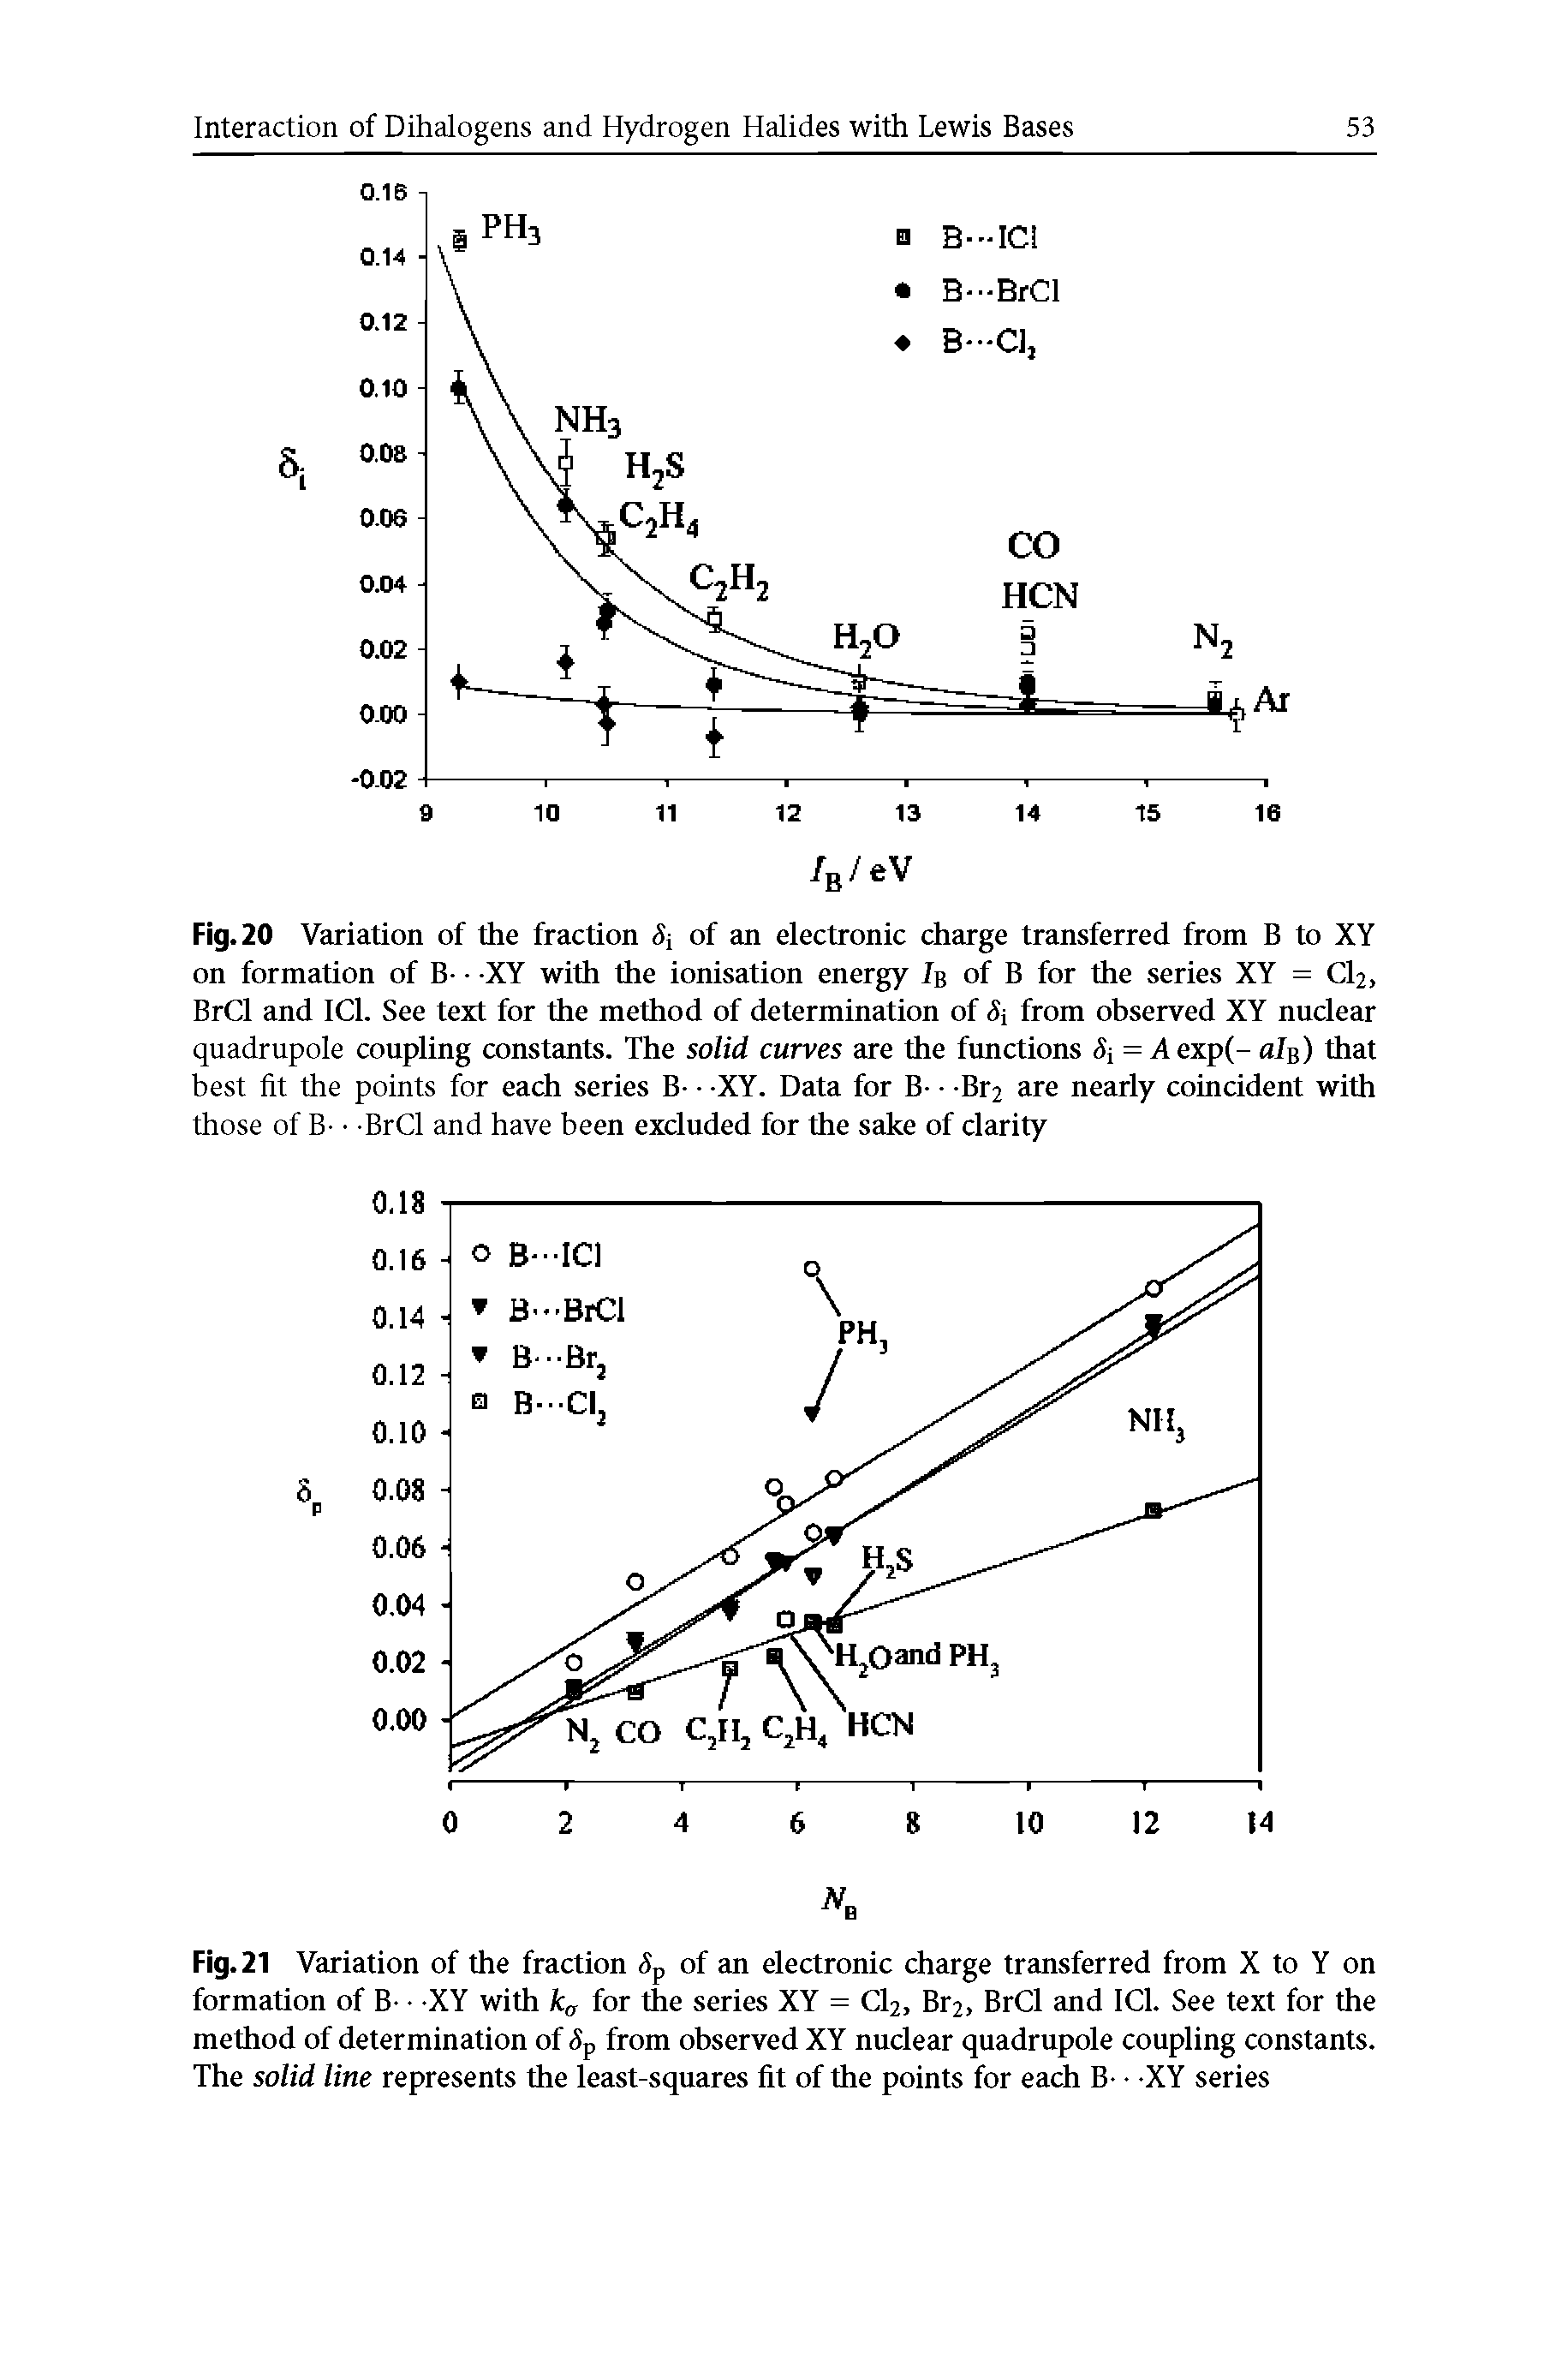 Fig. 20 Variation of the fraction <5 of an electronic charge transferred from B to XY on formation of B- XY with the ionisation energy 7b of B for the series XY = 02, BrO and IO. See text for the method of determination of Si from observed XY nuclear quadrupole coupling constants. The solid curves are the functions <5 = A exp(- al ) that best fit the points for each series B- XY. Data for B- -B are nearly coincident with those of B- BrO and have been excluded for the sake of clarity...